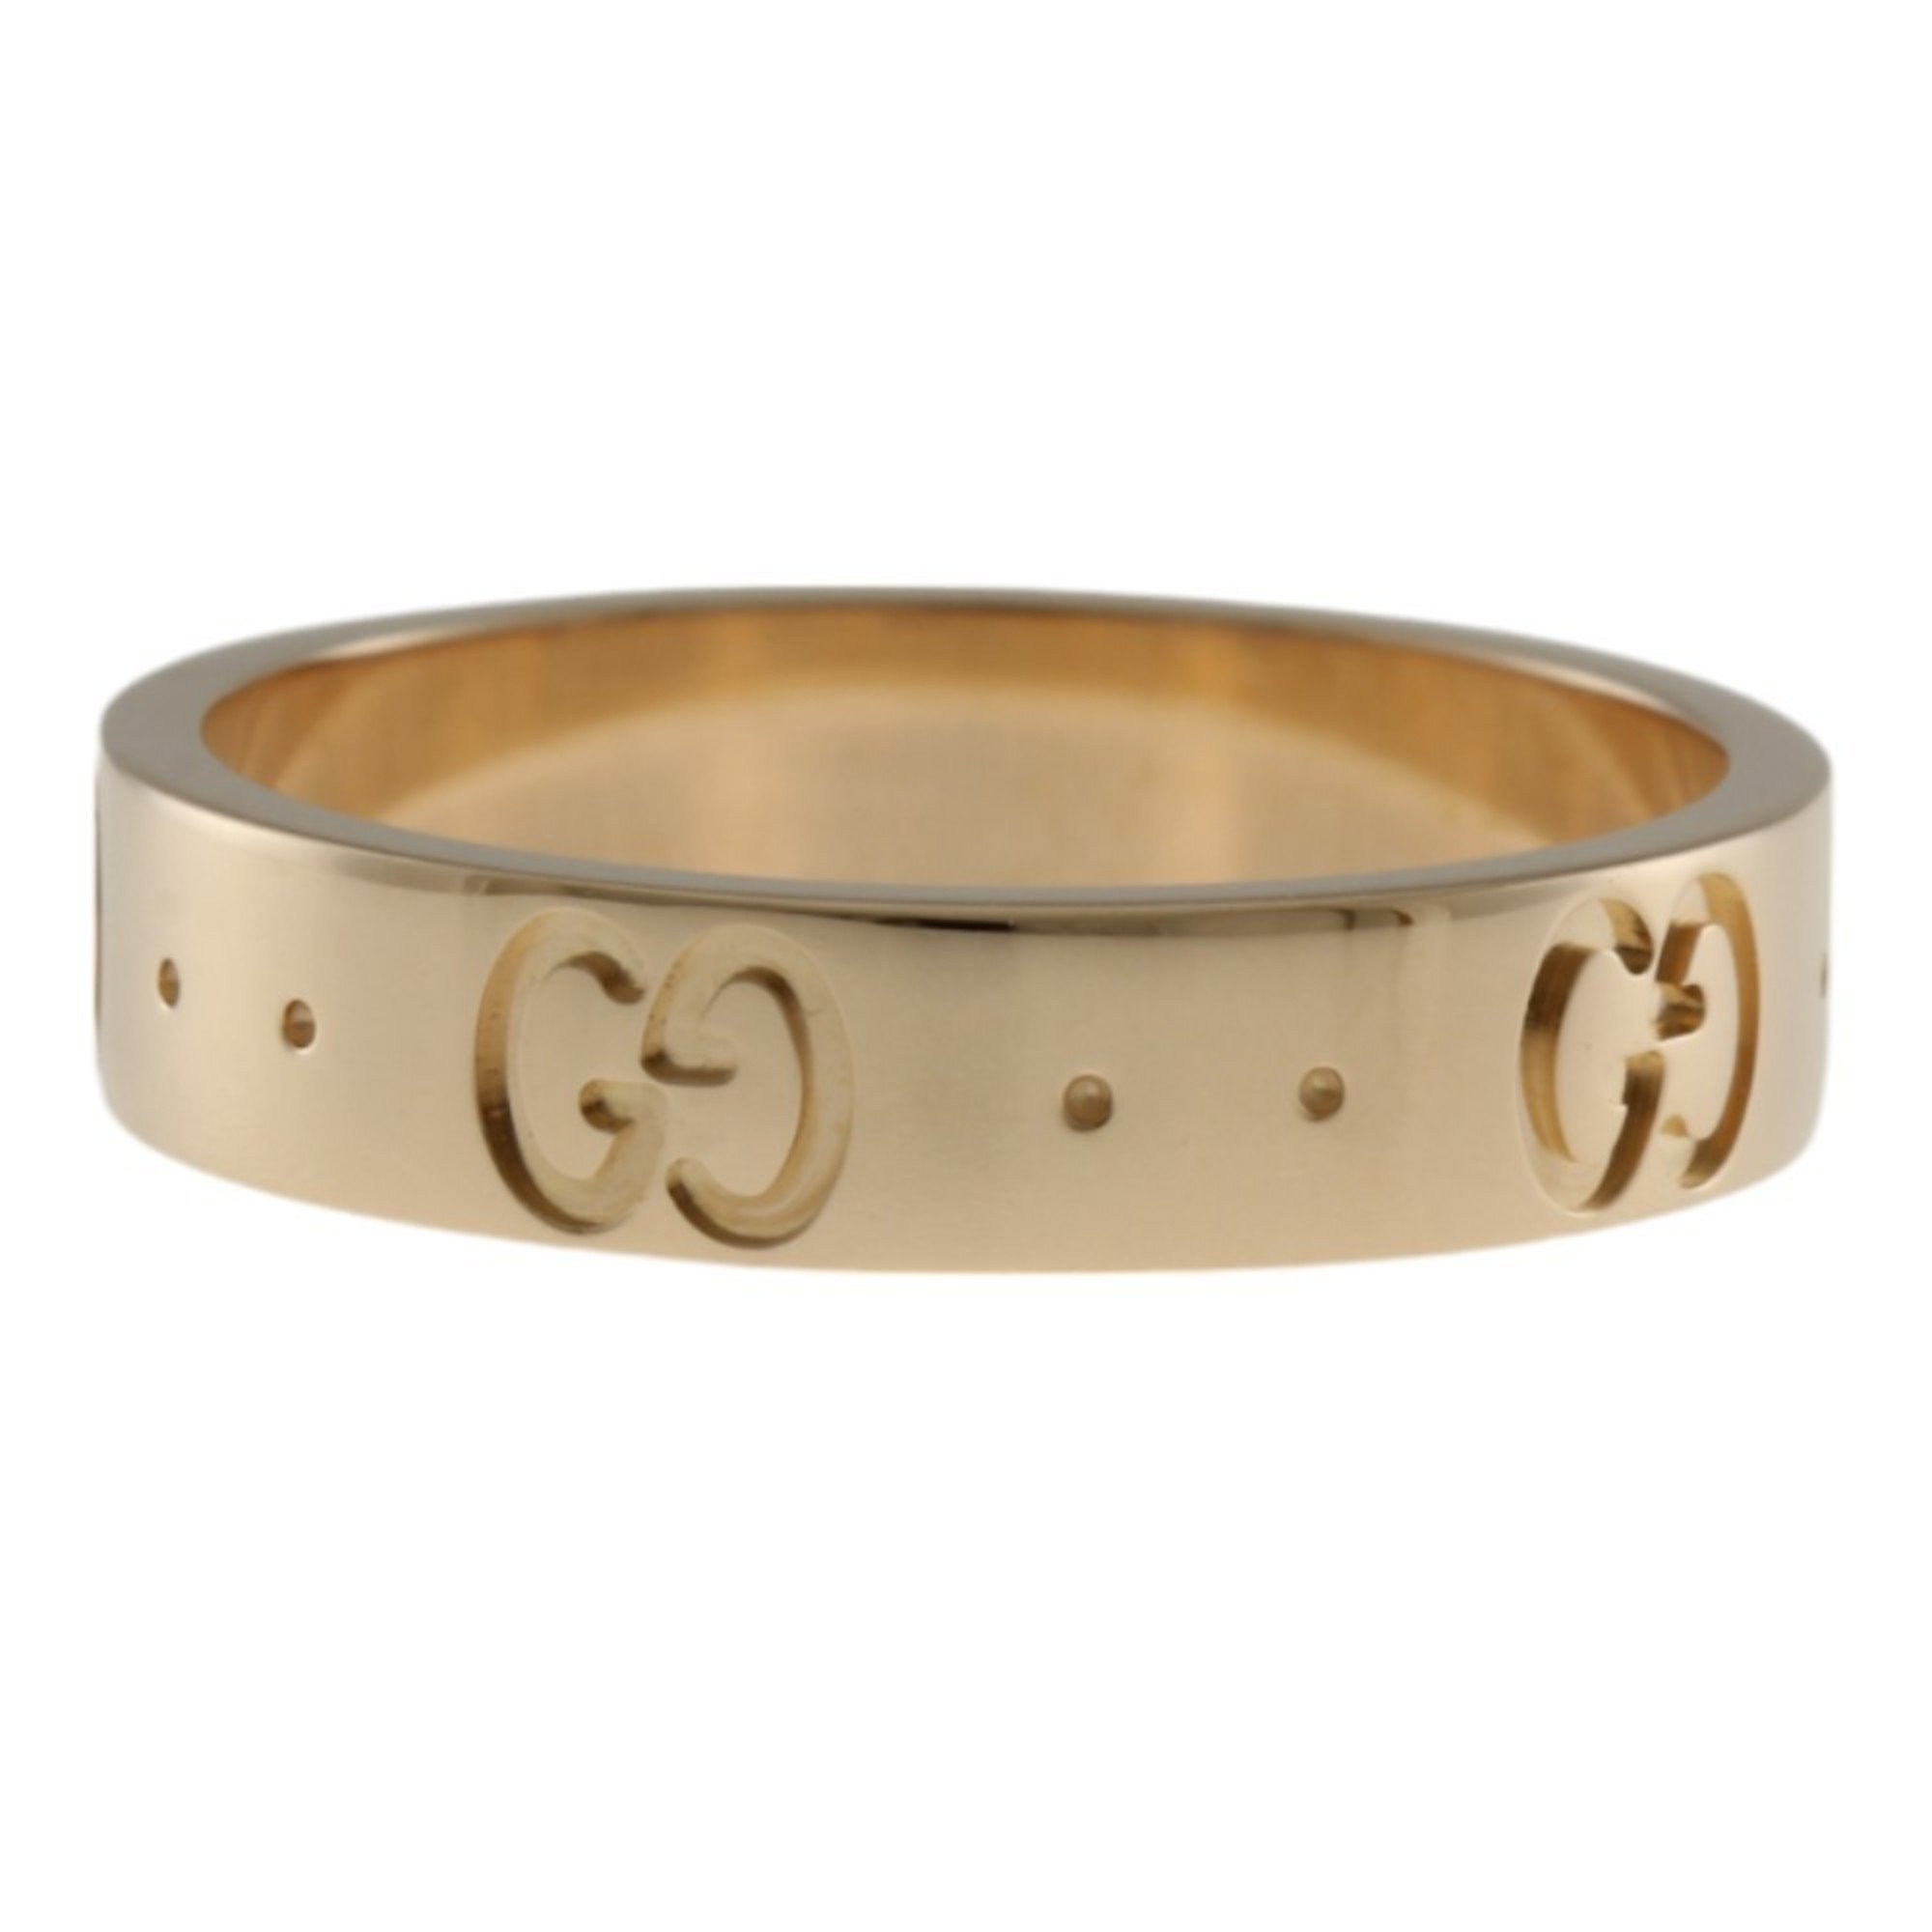 Gucci Icon Ring, Size 9.5, 18k Gold, Women's, GUCCI